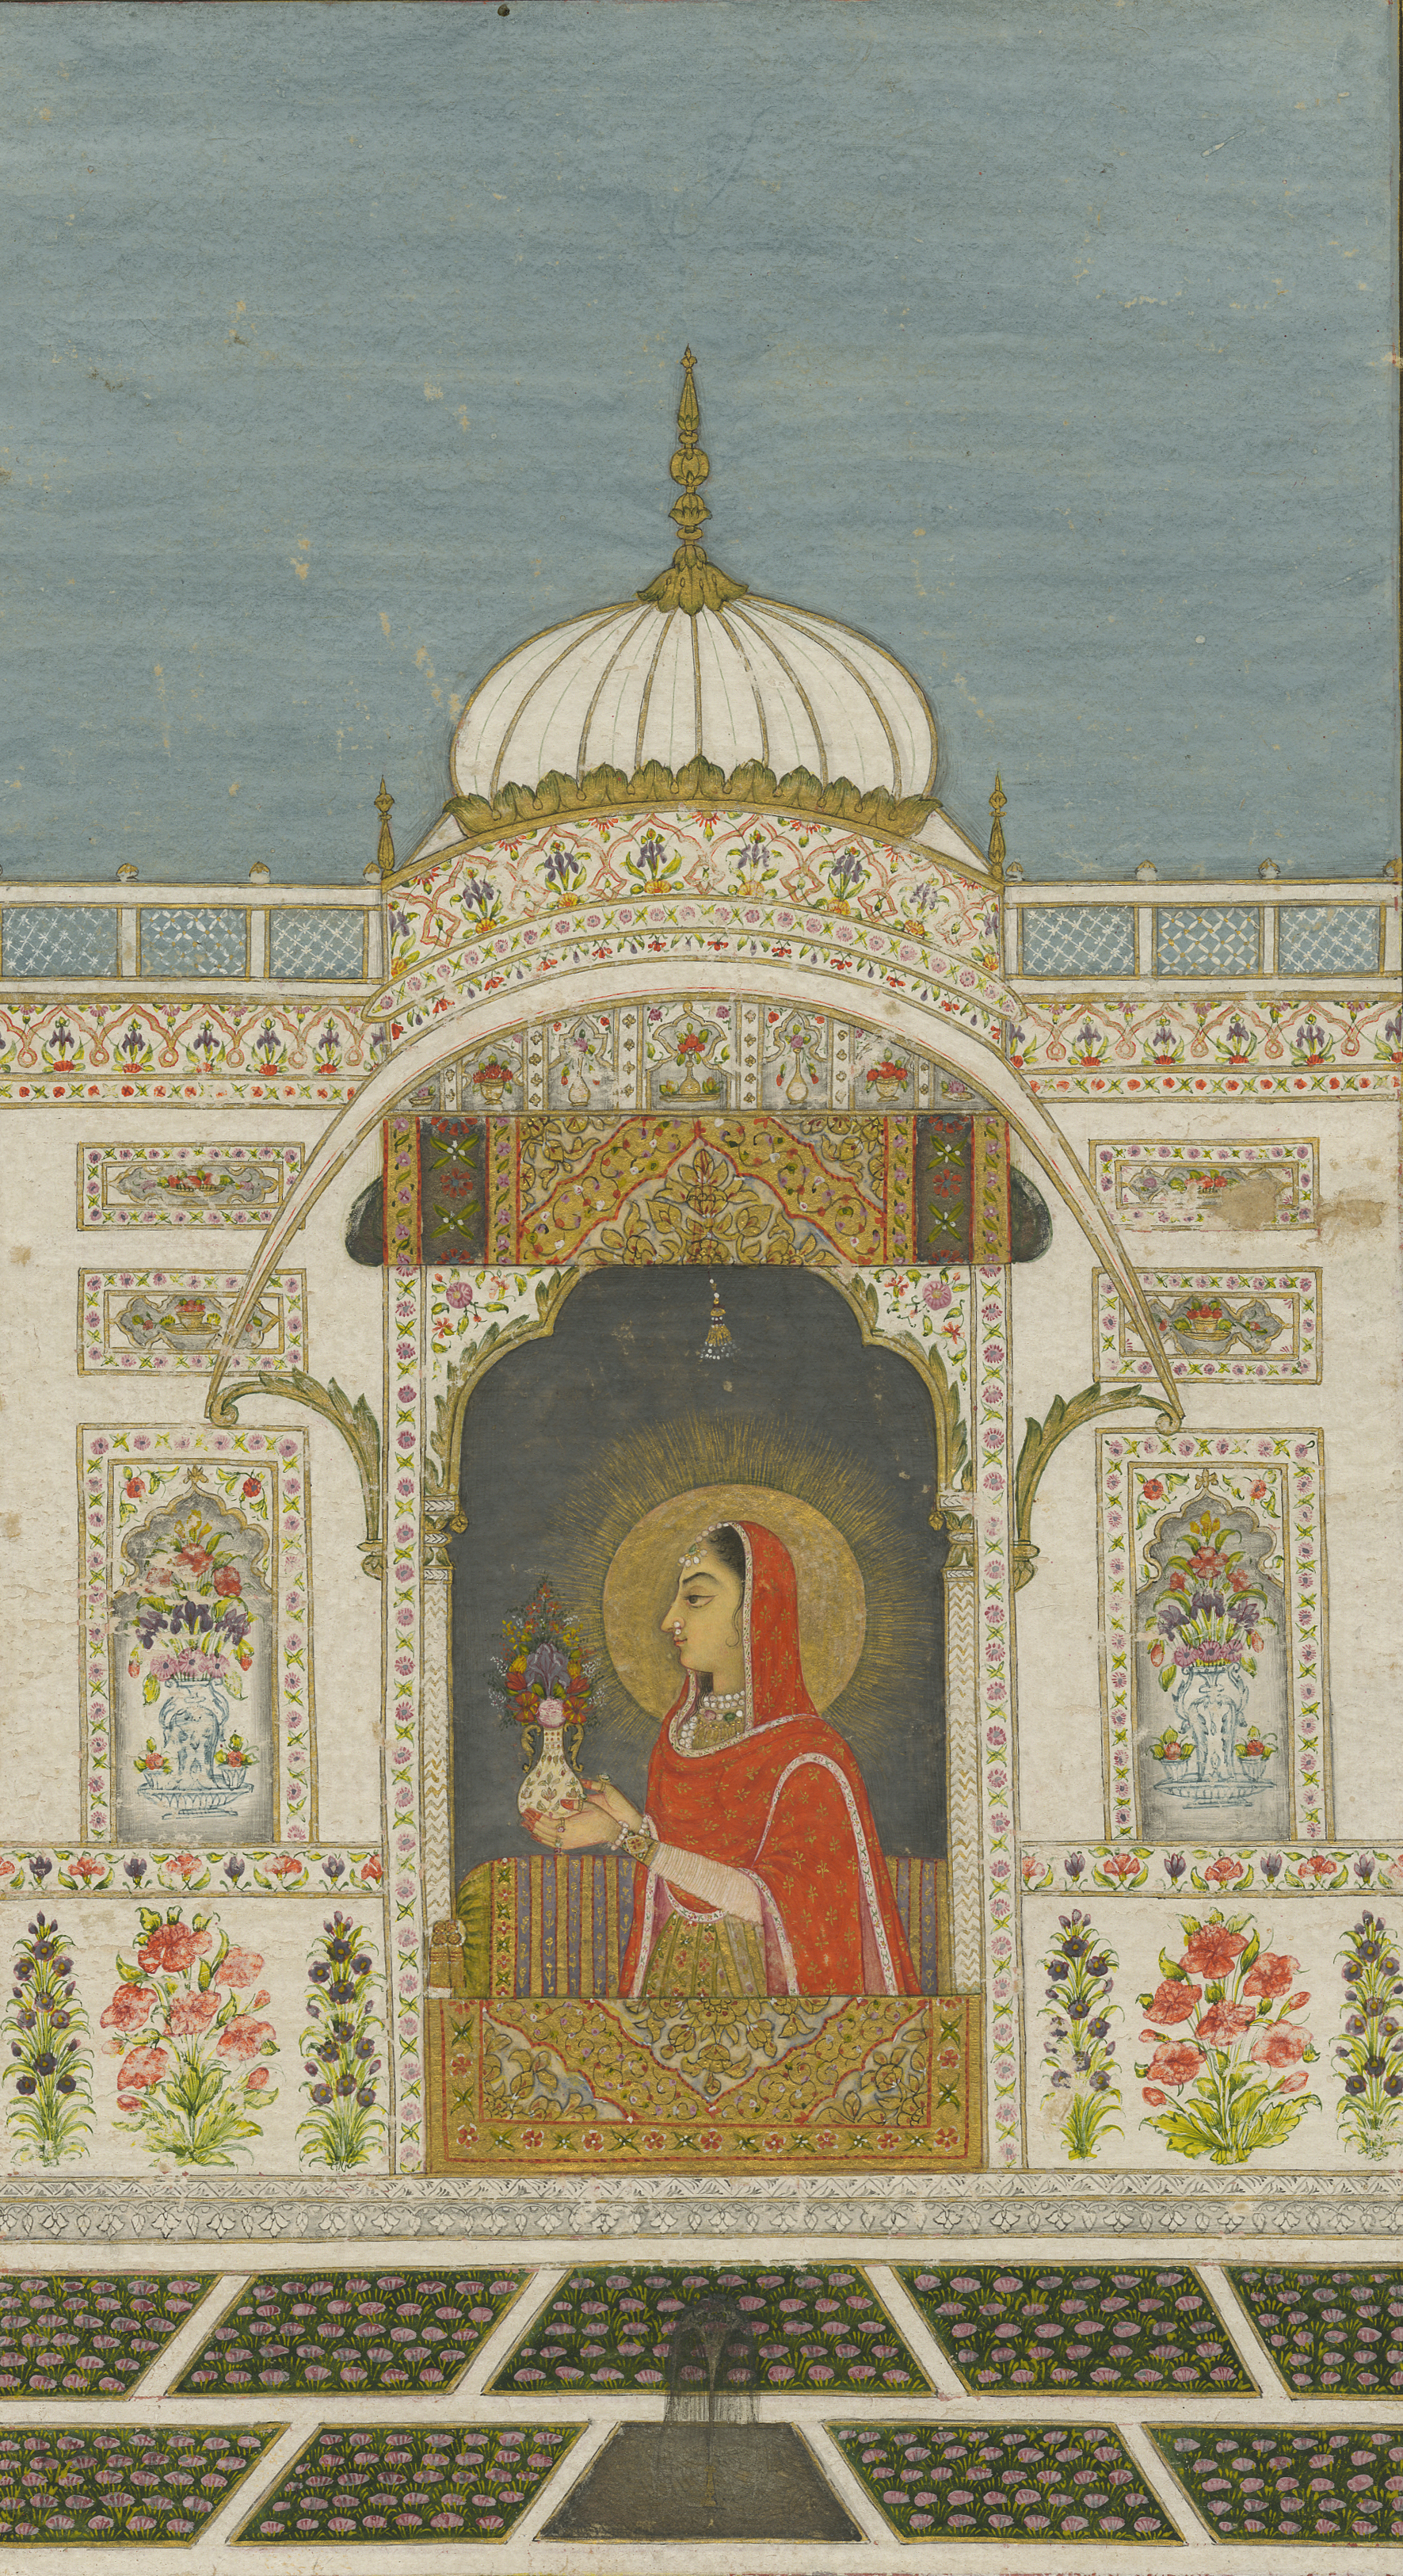 Detailed painting in blue, whites and yellow of a person with dark hair in robe sitting at a window in a place with blue sky in background with ornate design framing the image